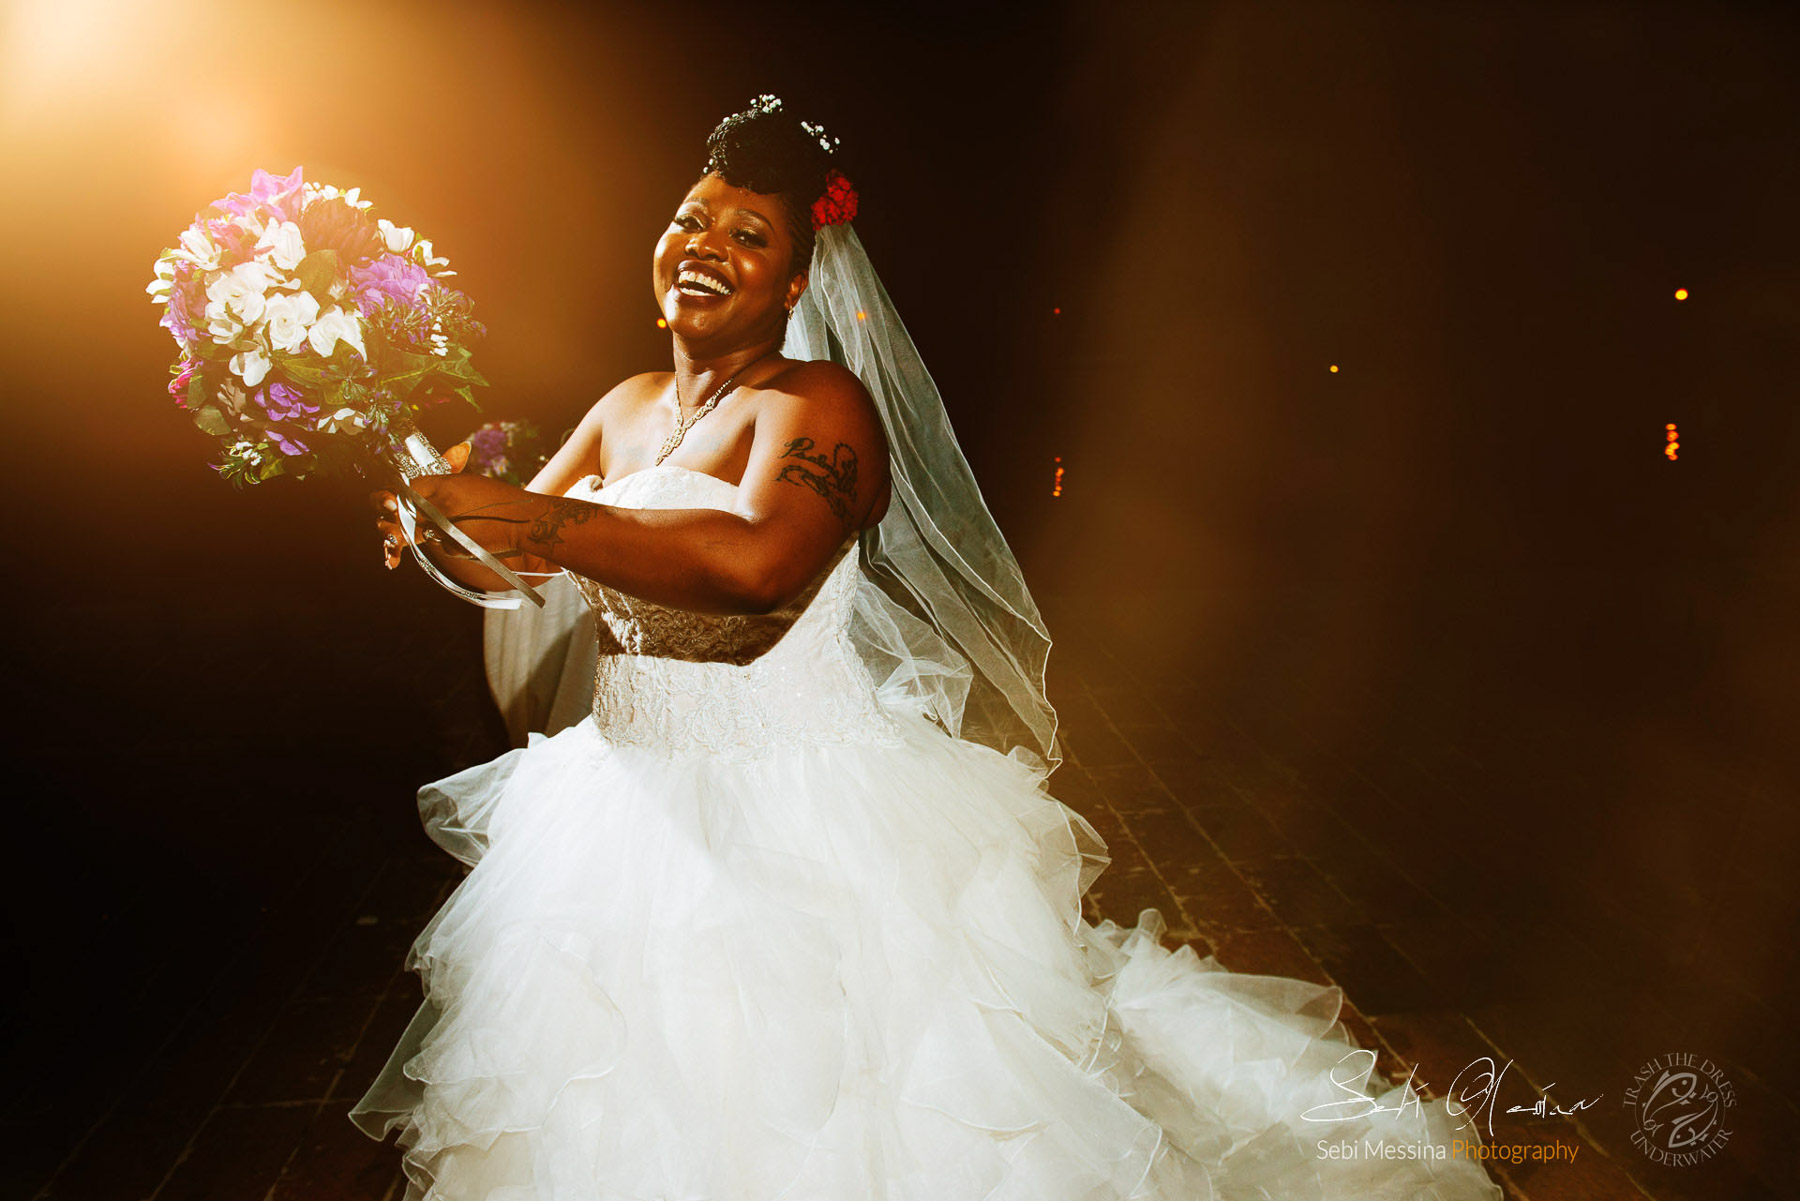 Now Sapphire - KIesha and Shawn - Getting Married in Mexico